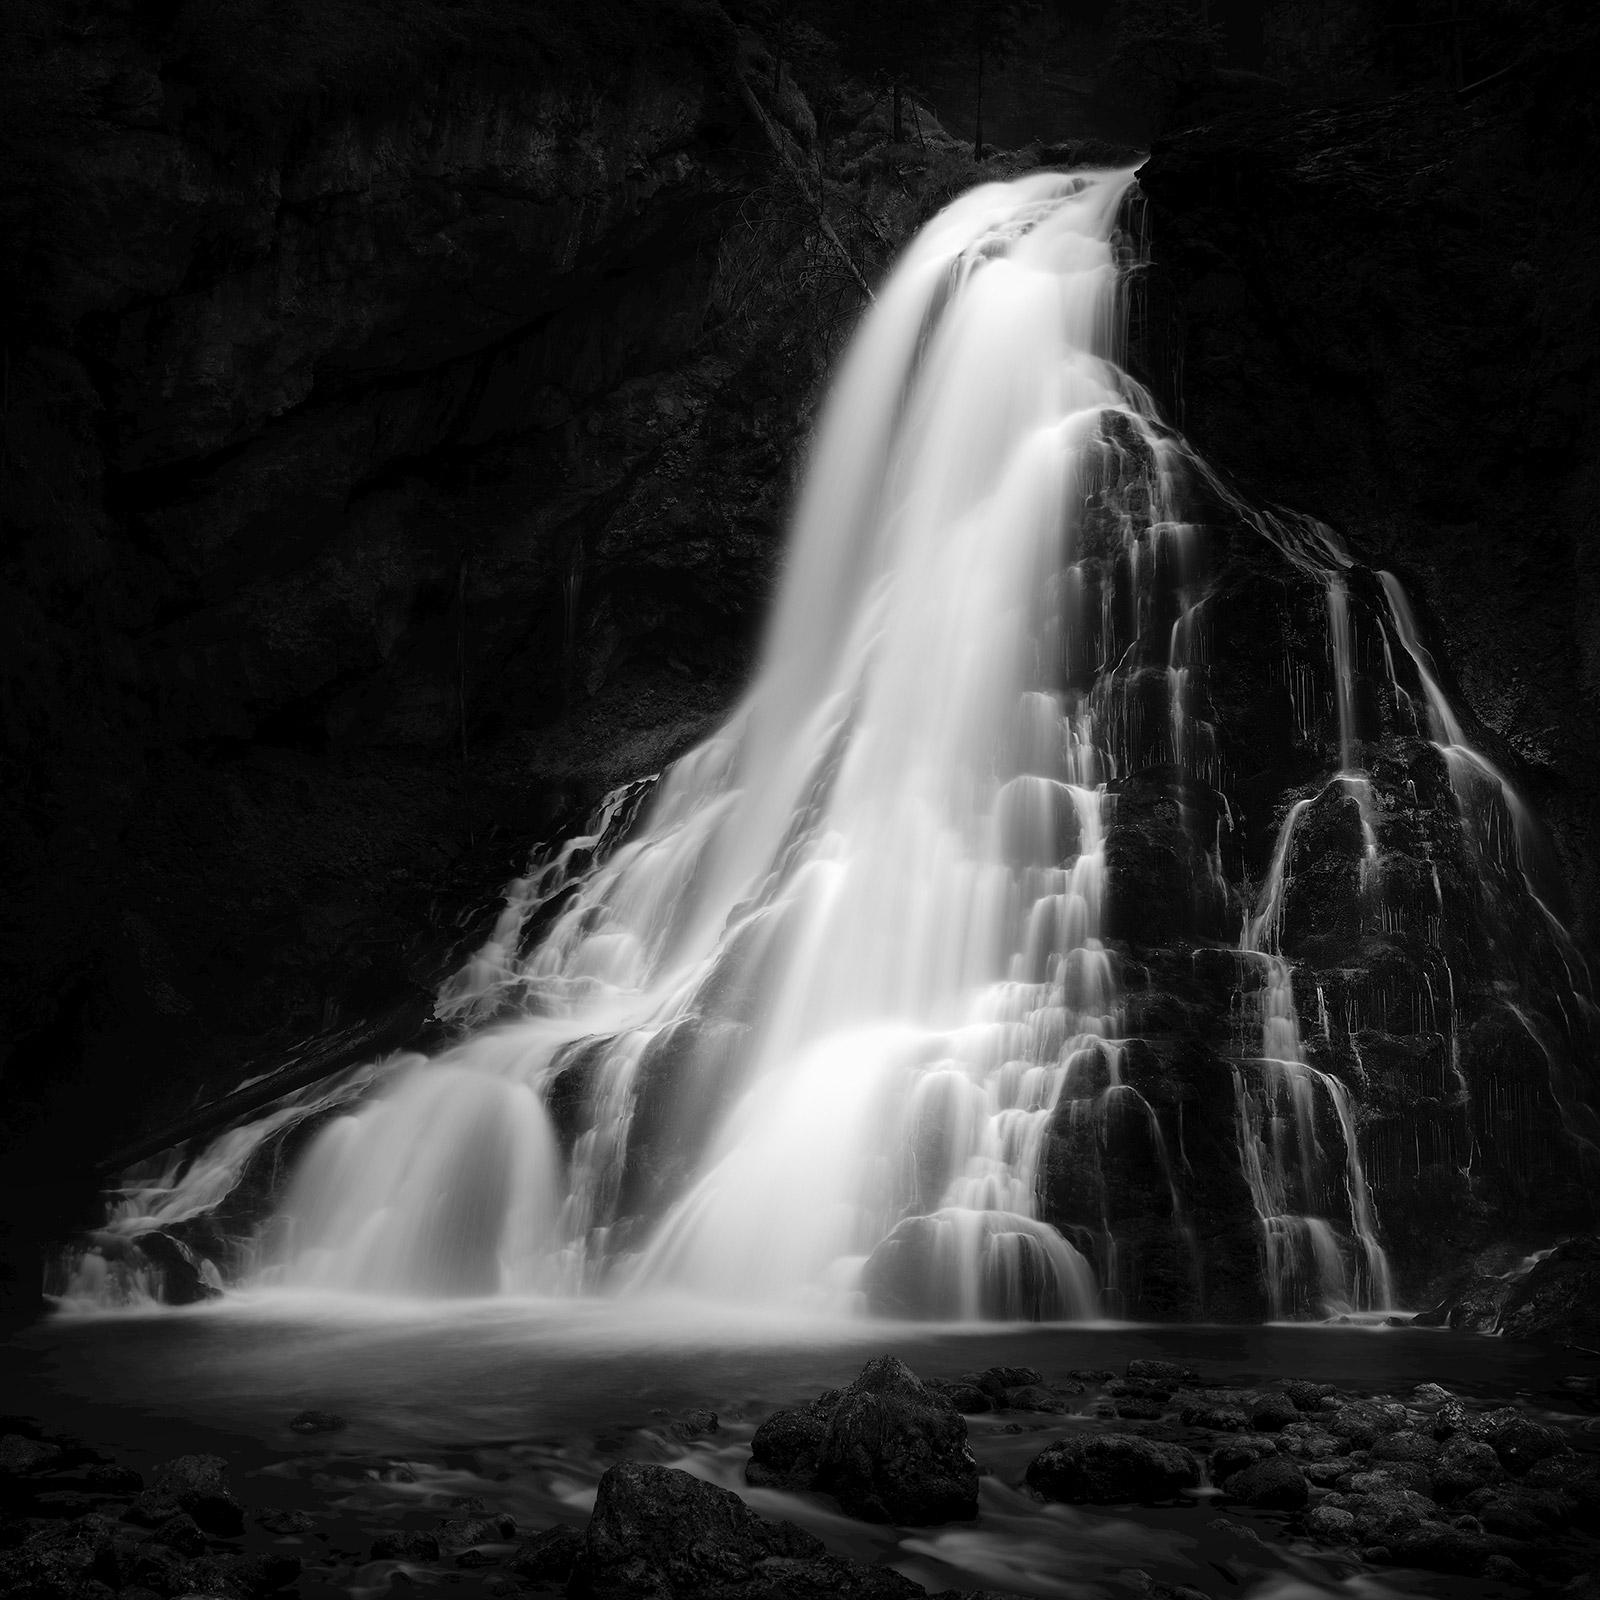 Gerald Berghammer Black and White Photograph - Golling Falls, waterfall, Austria, black and white photography, art landscape